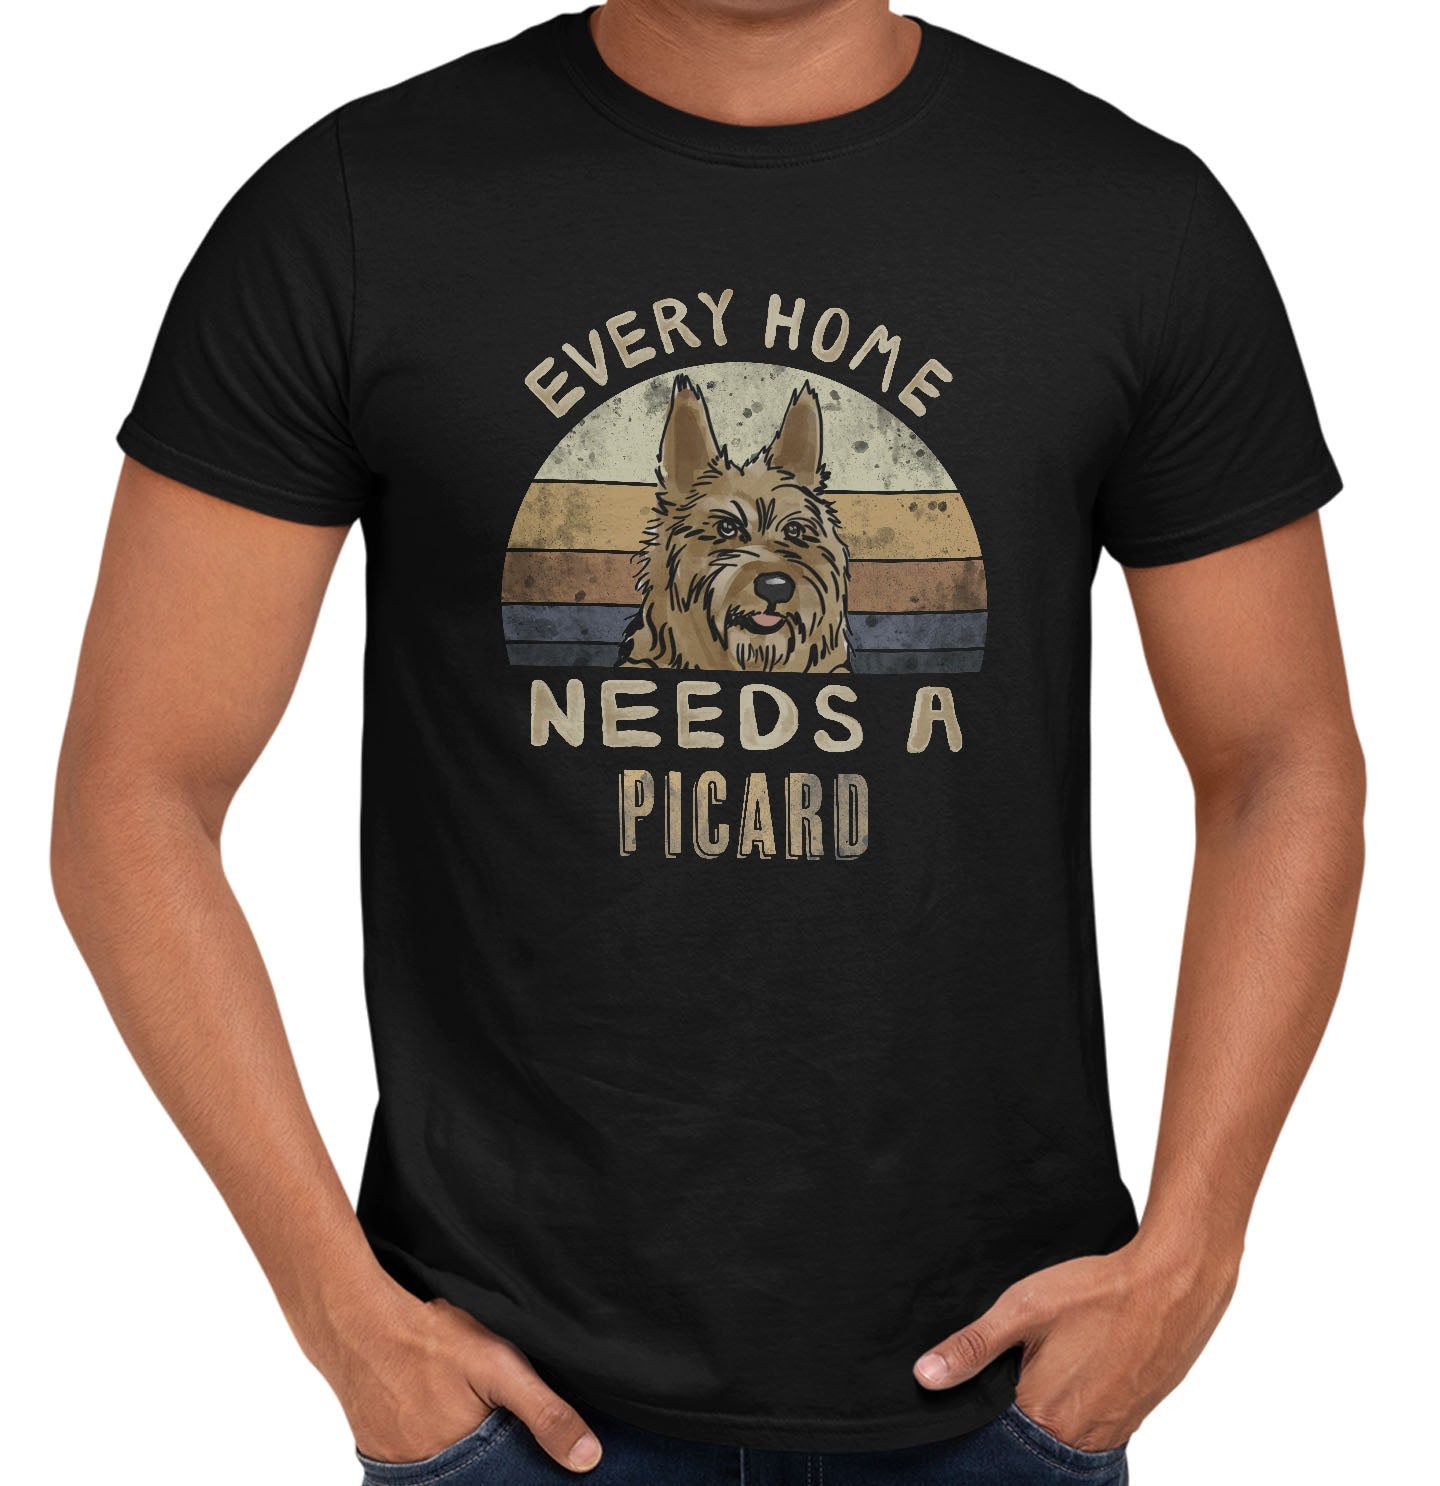 Every Home Needs a Berger Picard - Adult Unisex T-Shirt